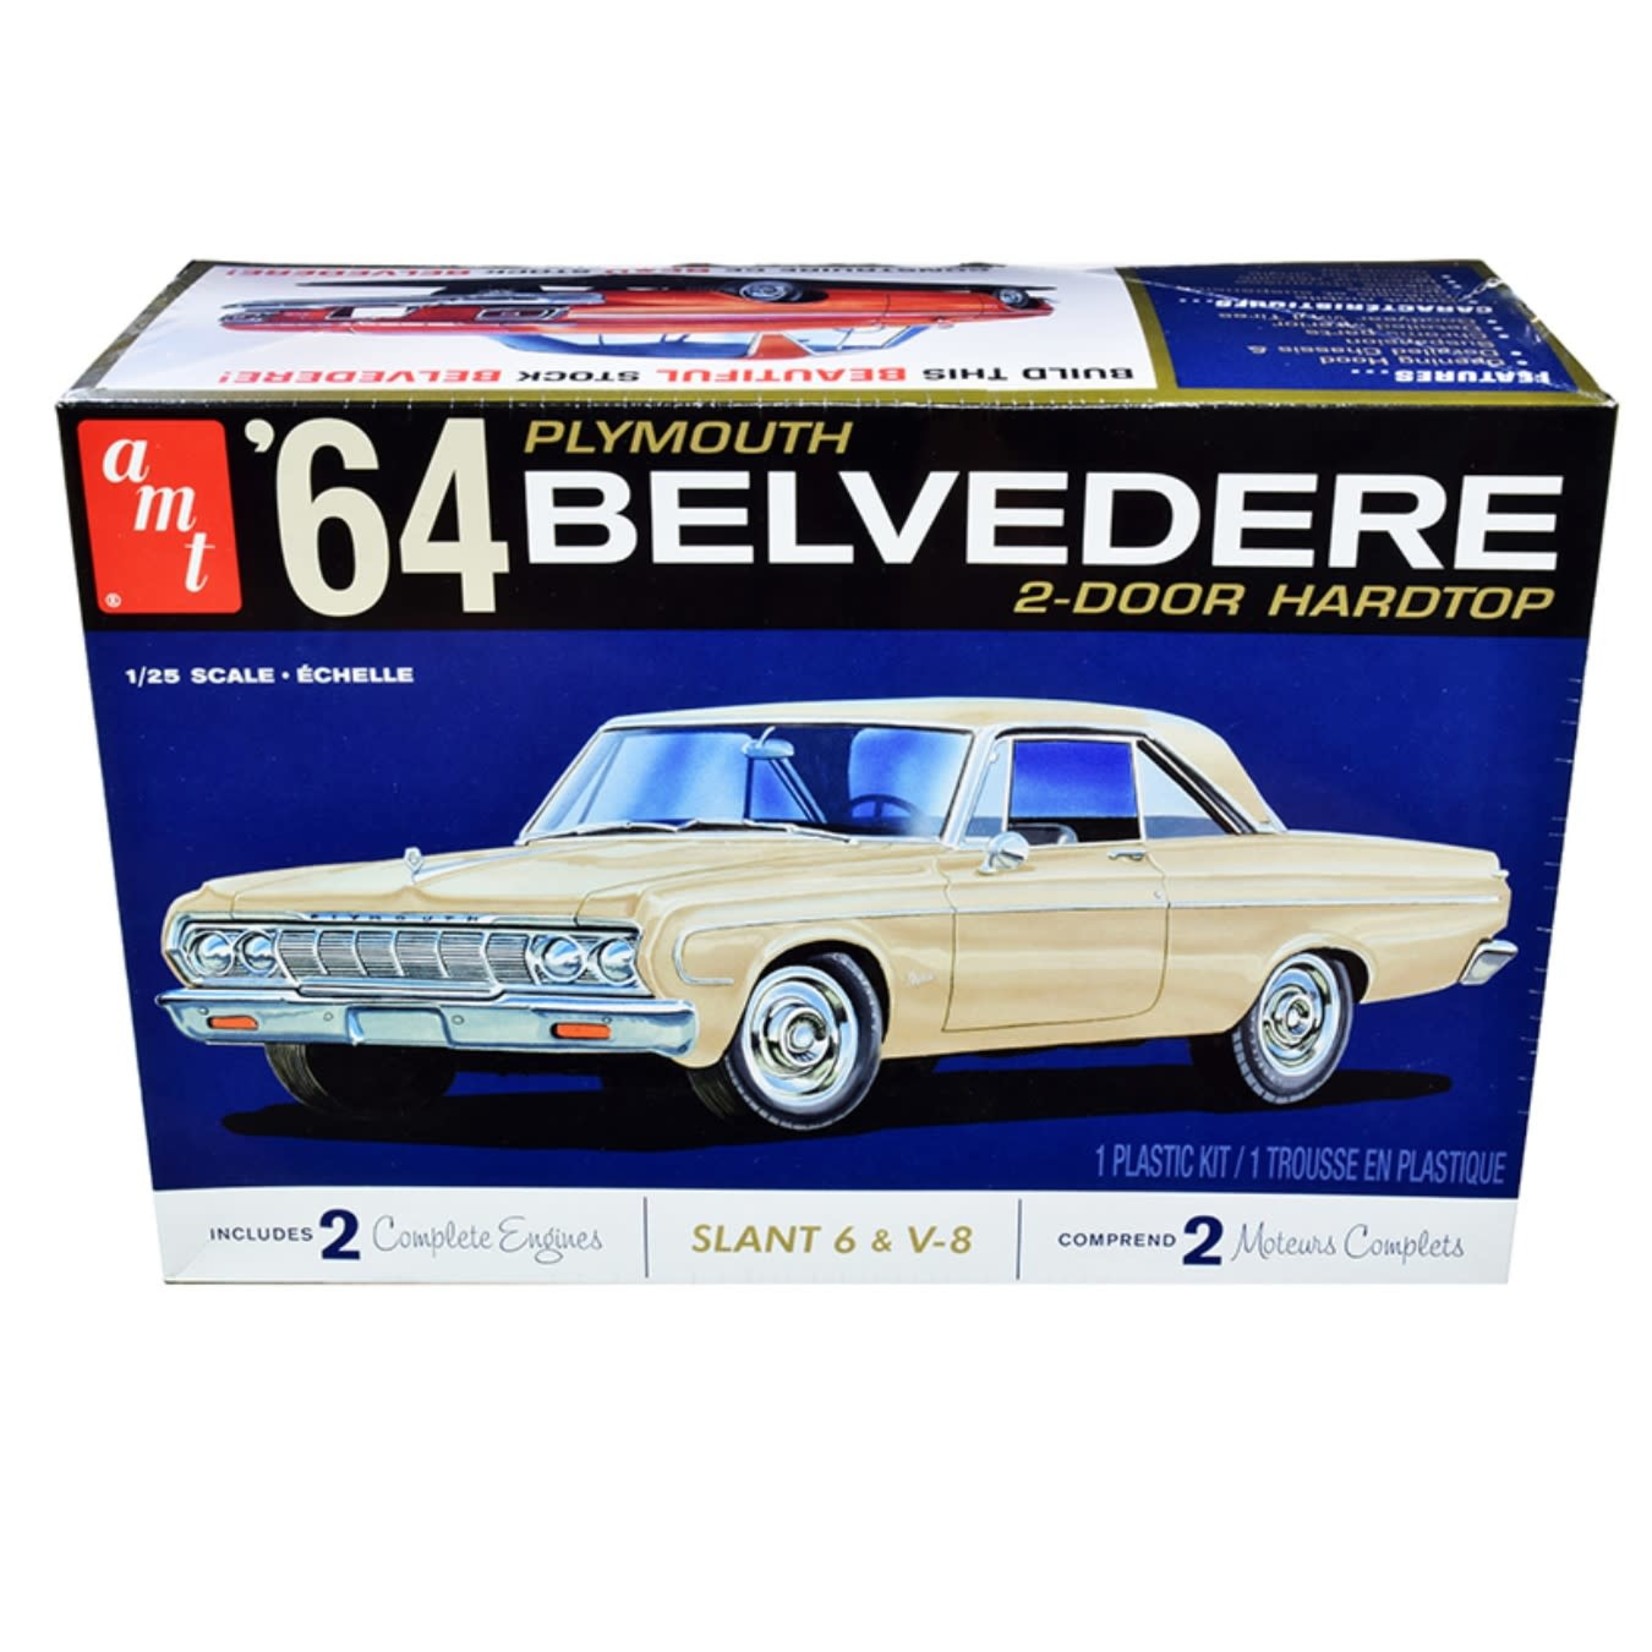 AMT 1/25 '64 Plymouth Belvedere W/ Straight 6 Engine Kit